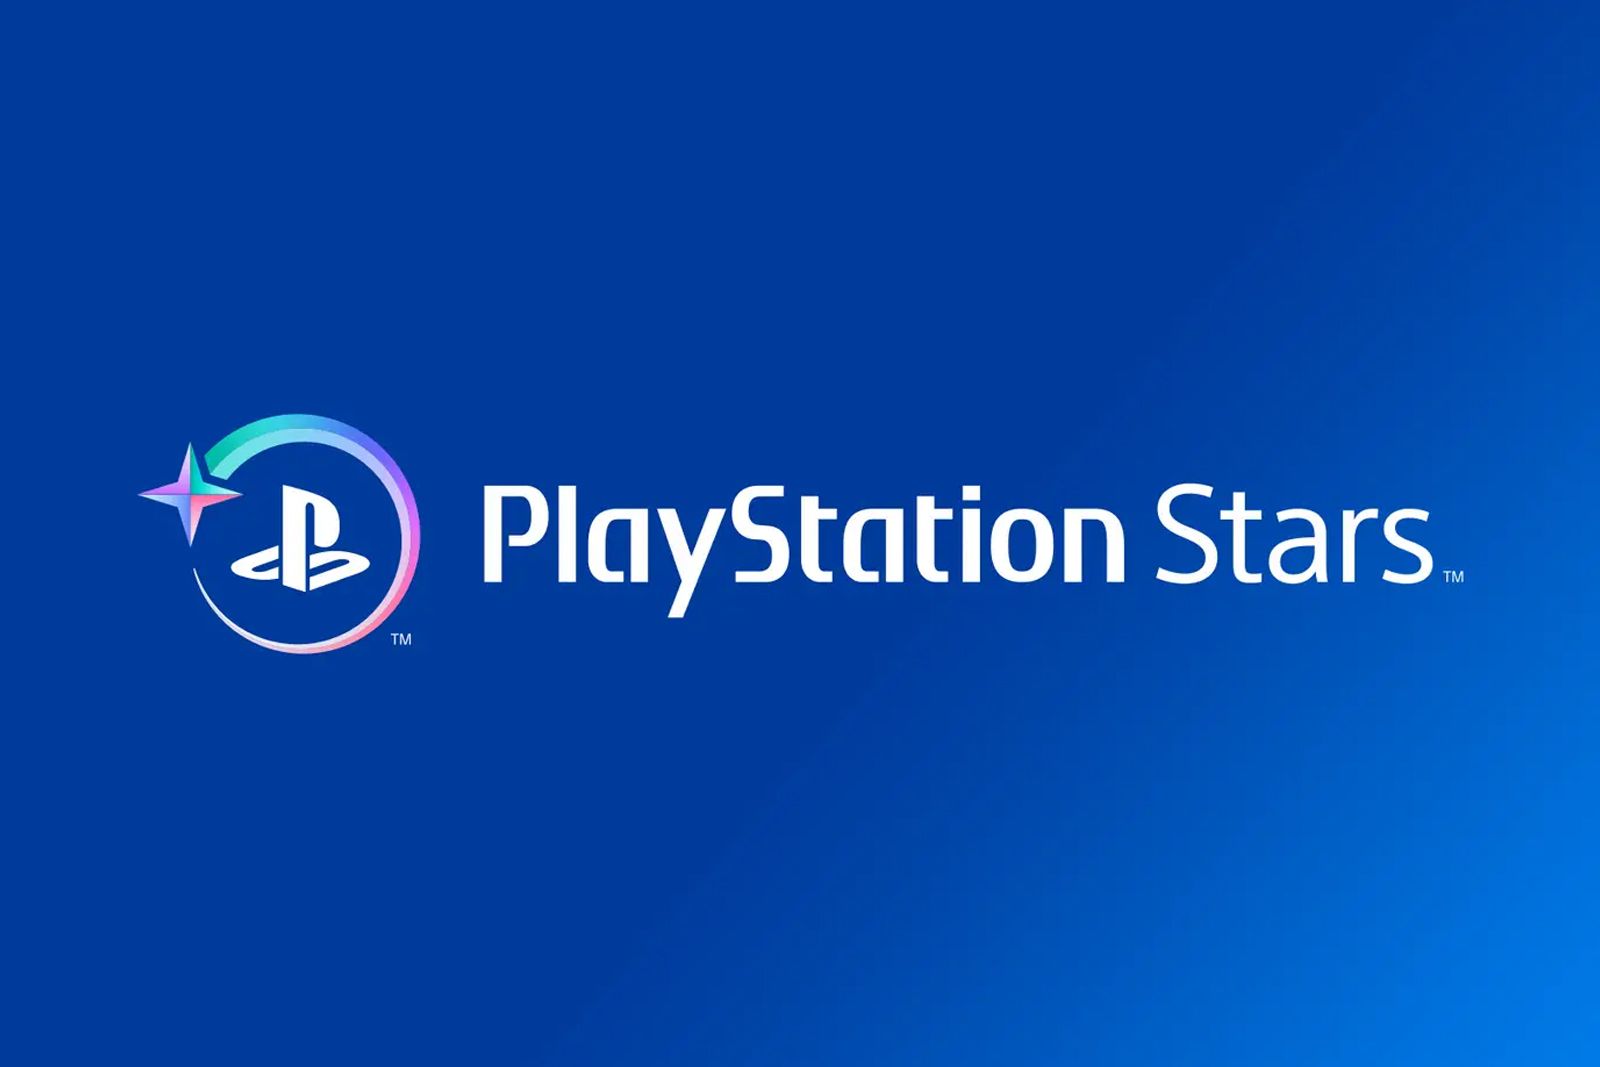 PlayStation Stars loyalty program launched by Sony photo 1